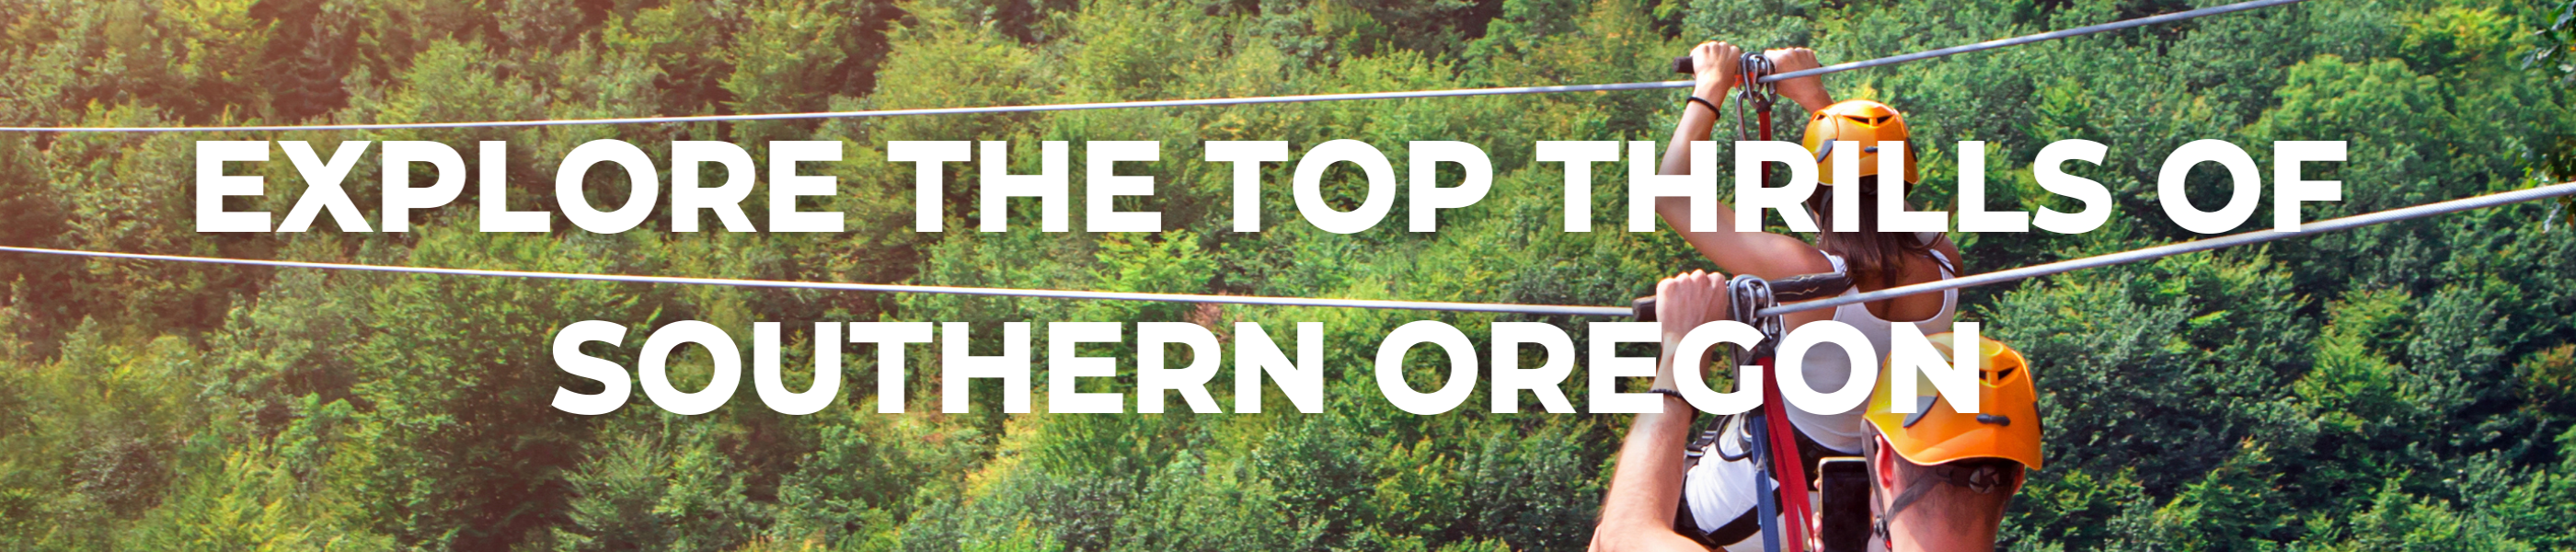 blog header, explore the top thrills of southern oregon